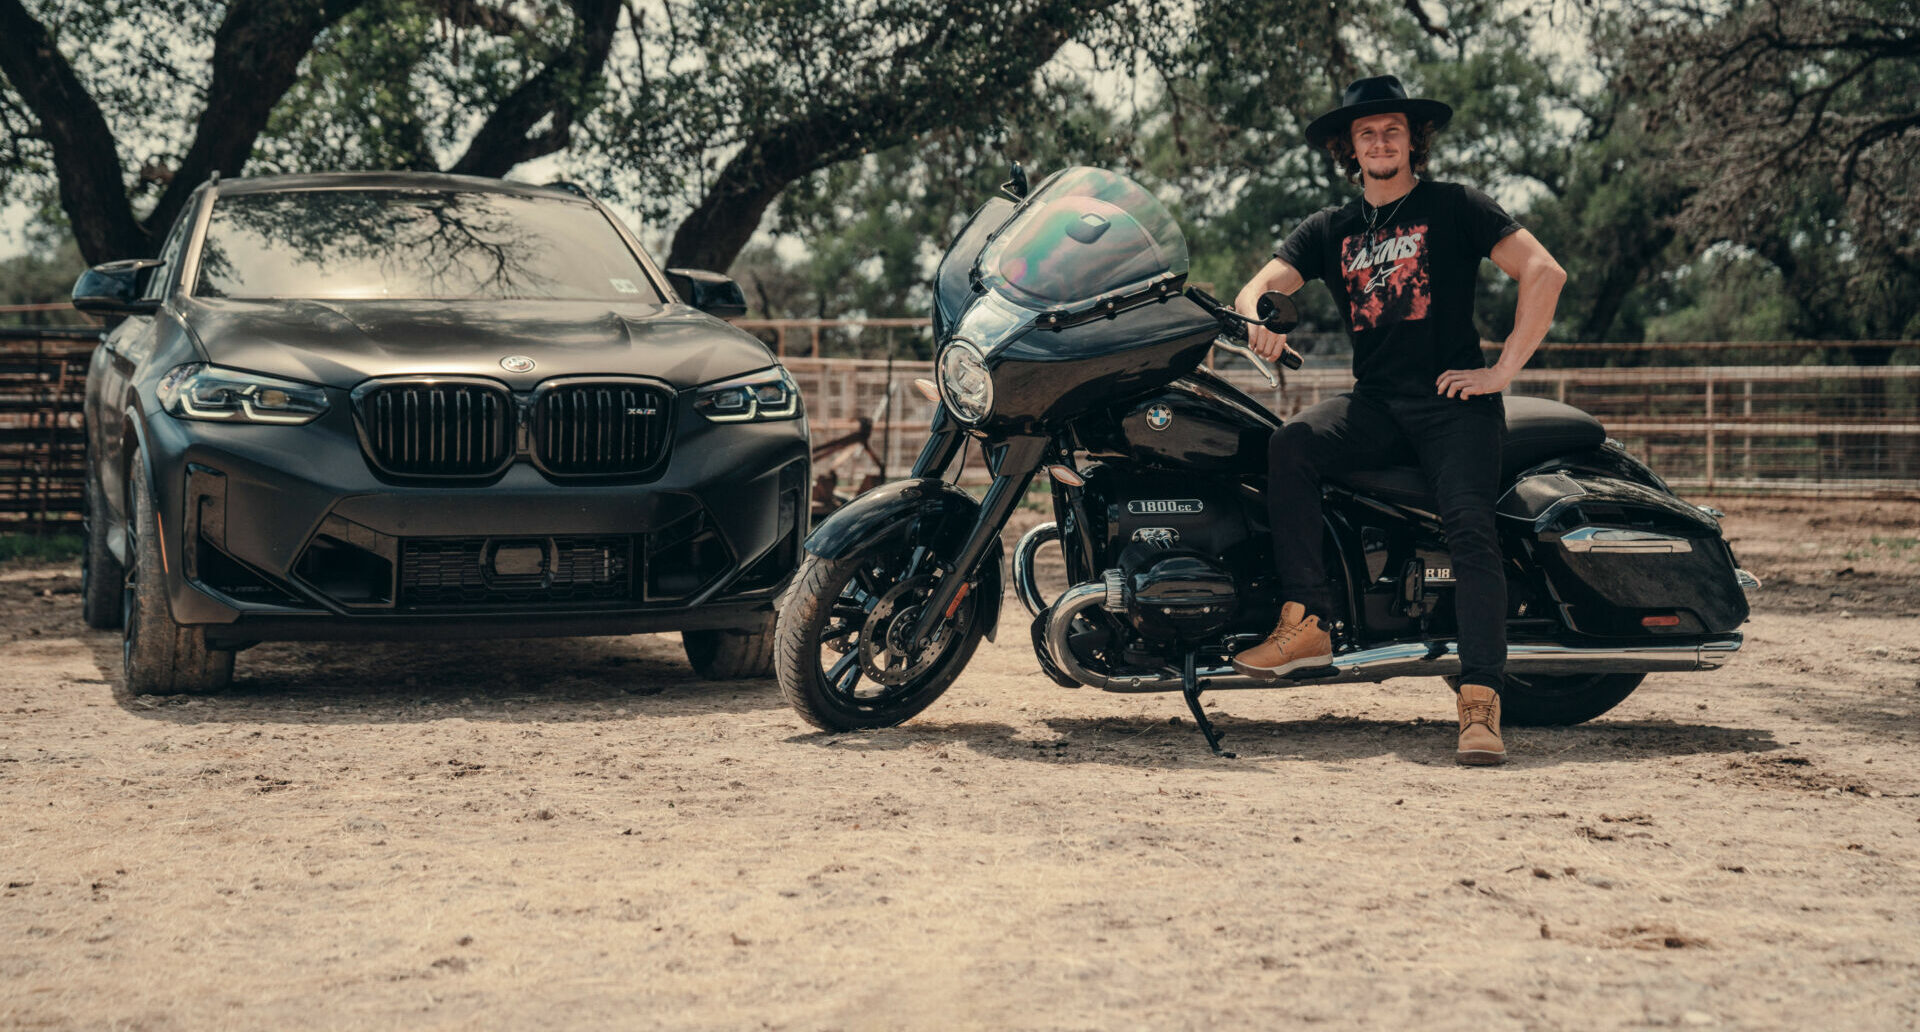 American Garrett Gerloff at home in Texas with some toys from BMW. Photo courtesy BMW Motorrad Motorsport.